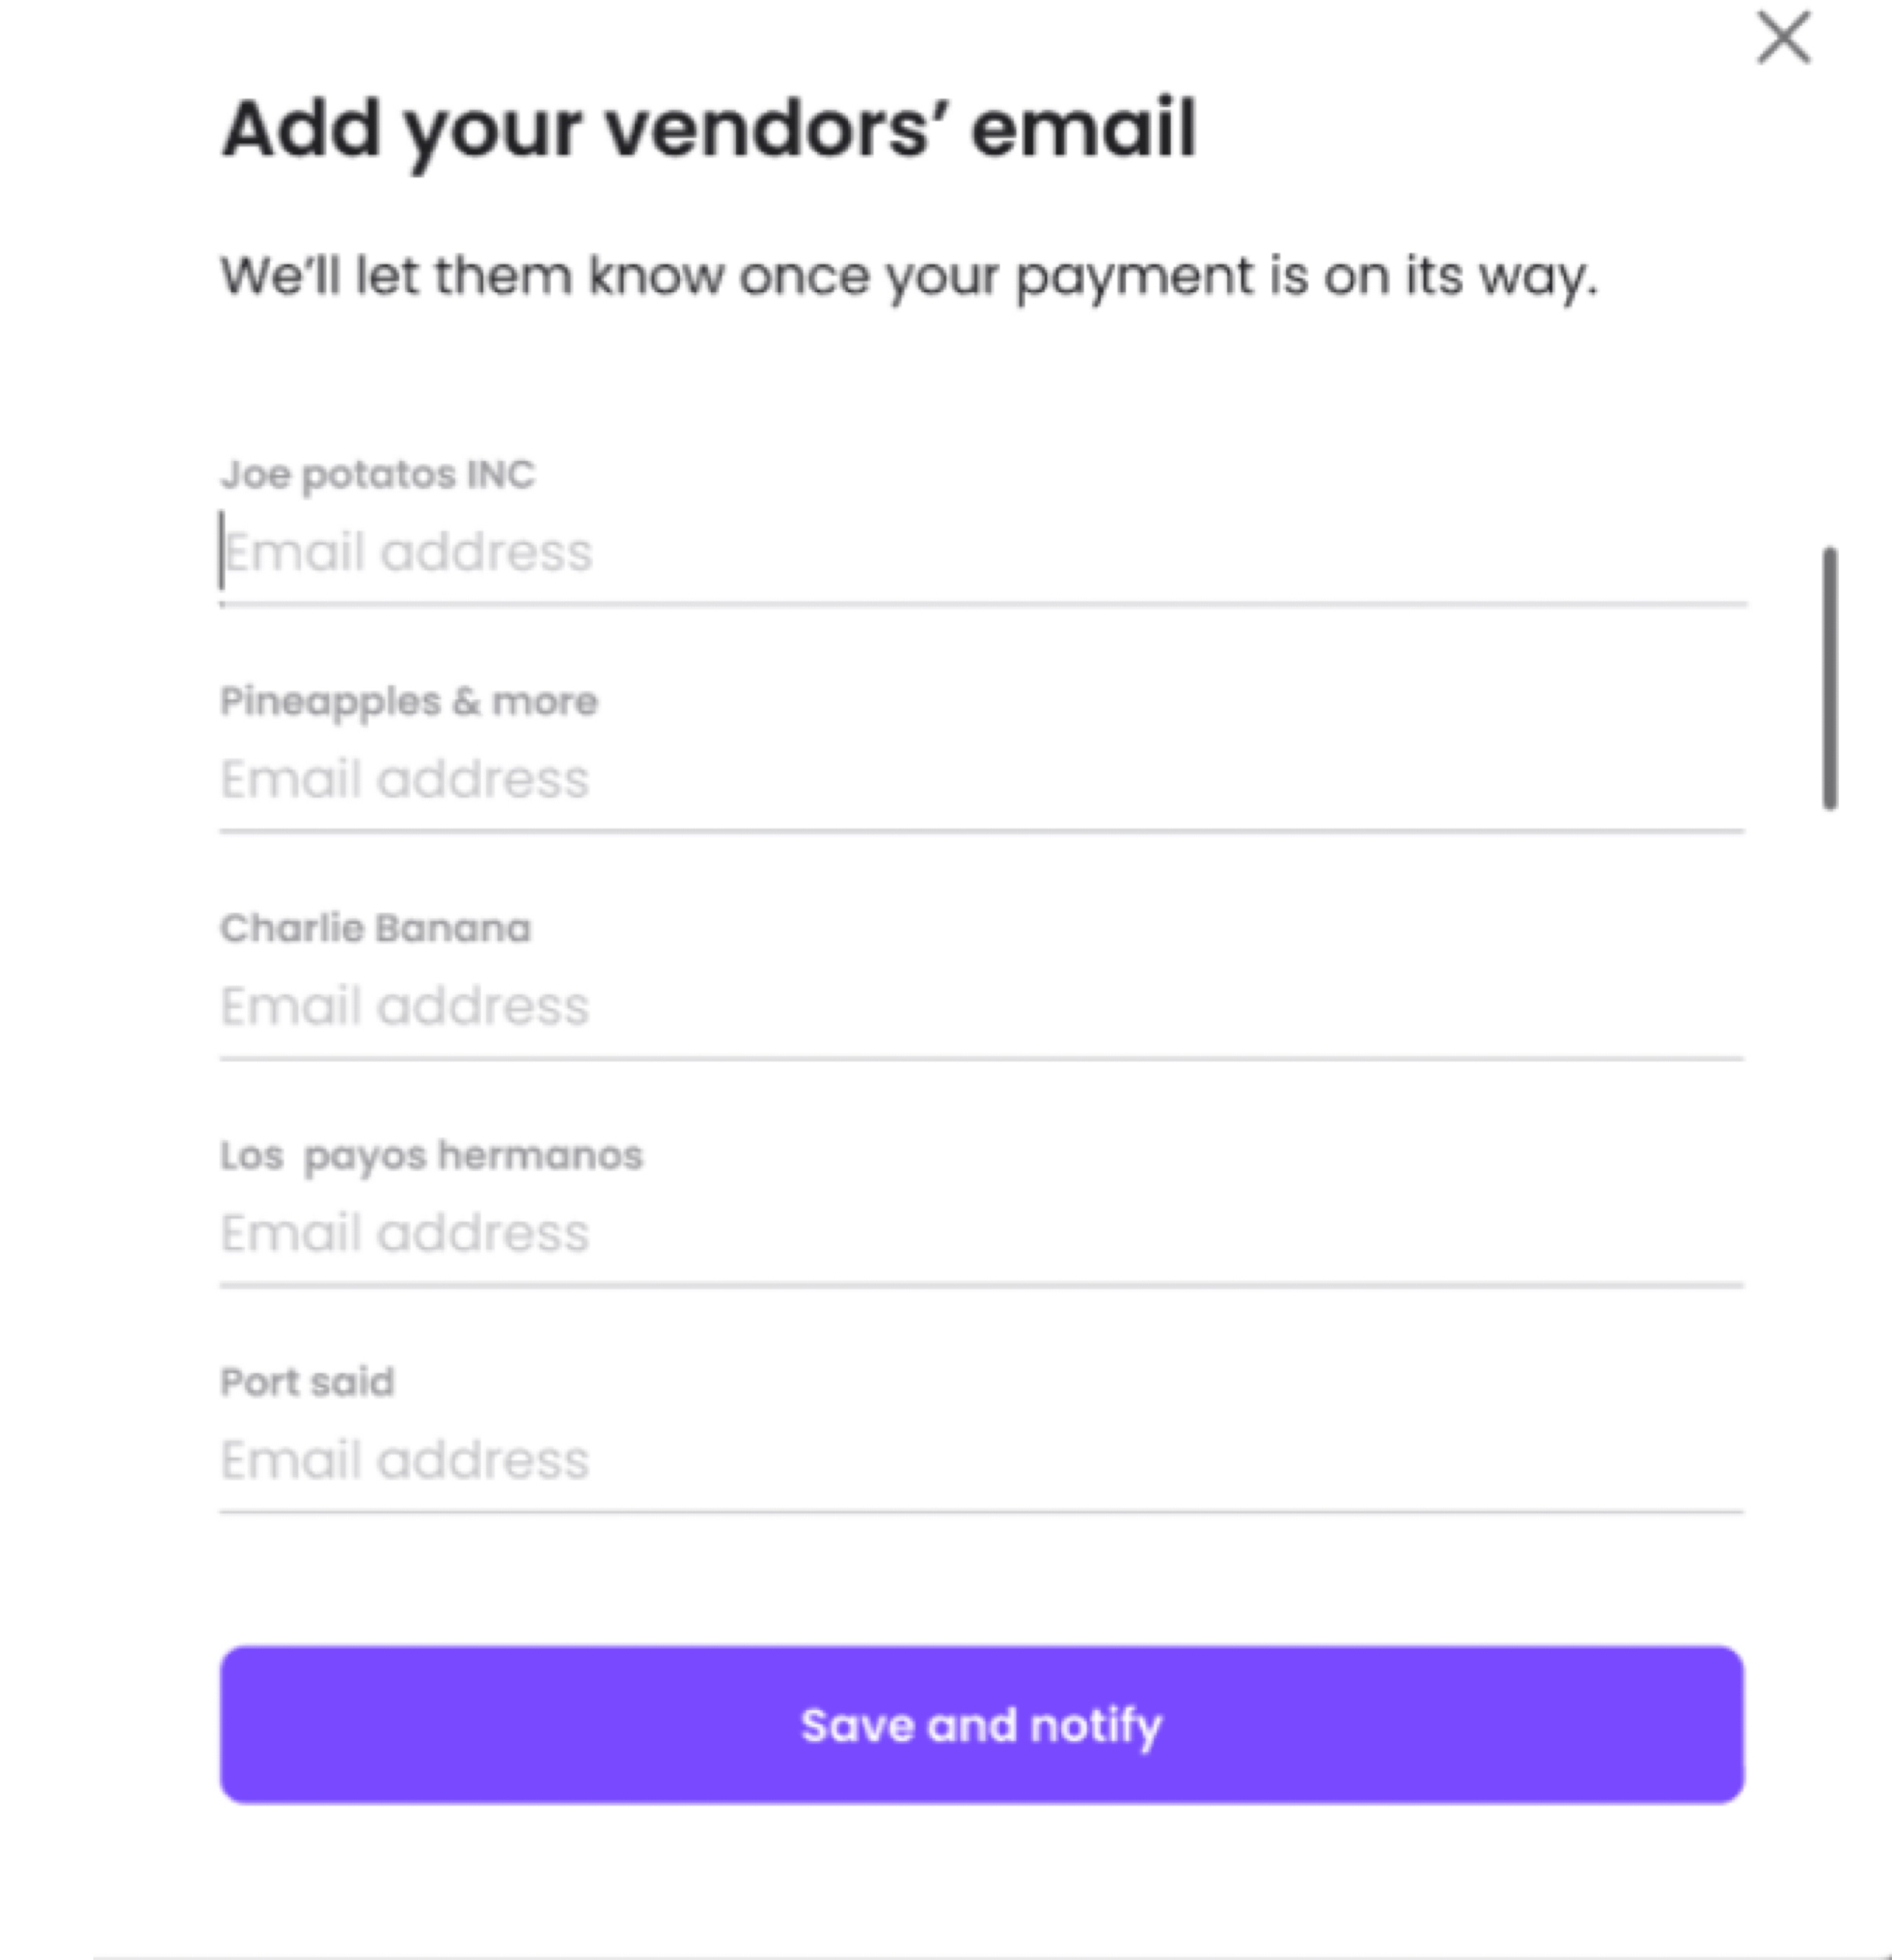 Add_your_vendors_email.jpg